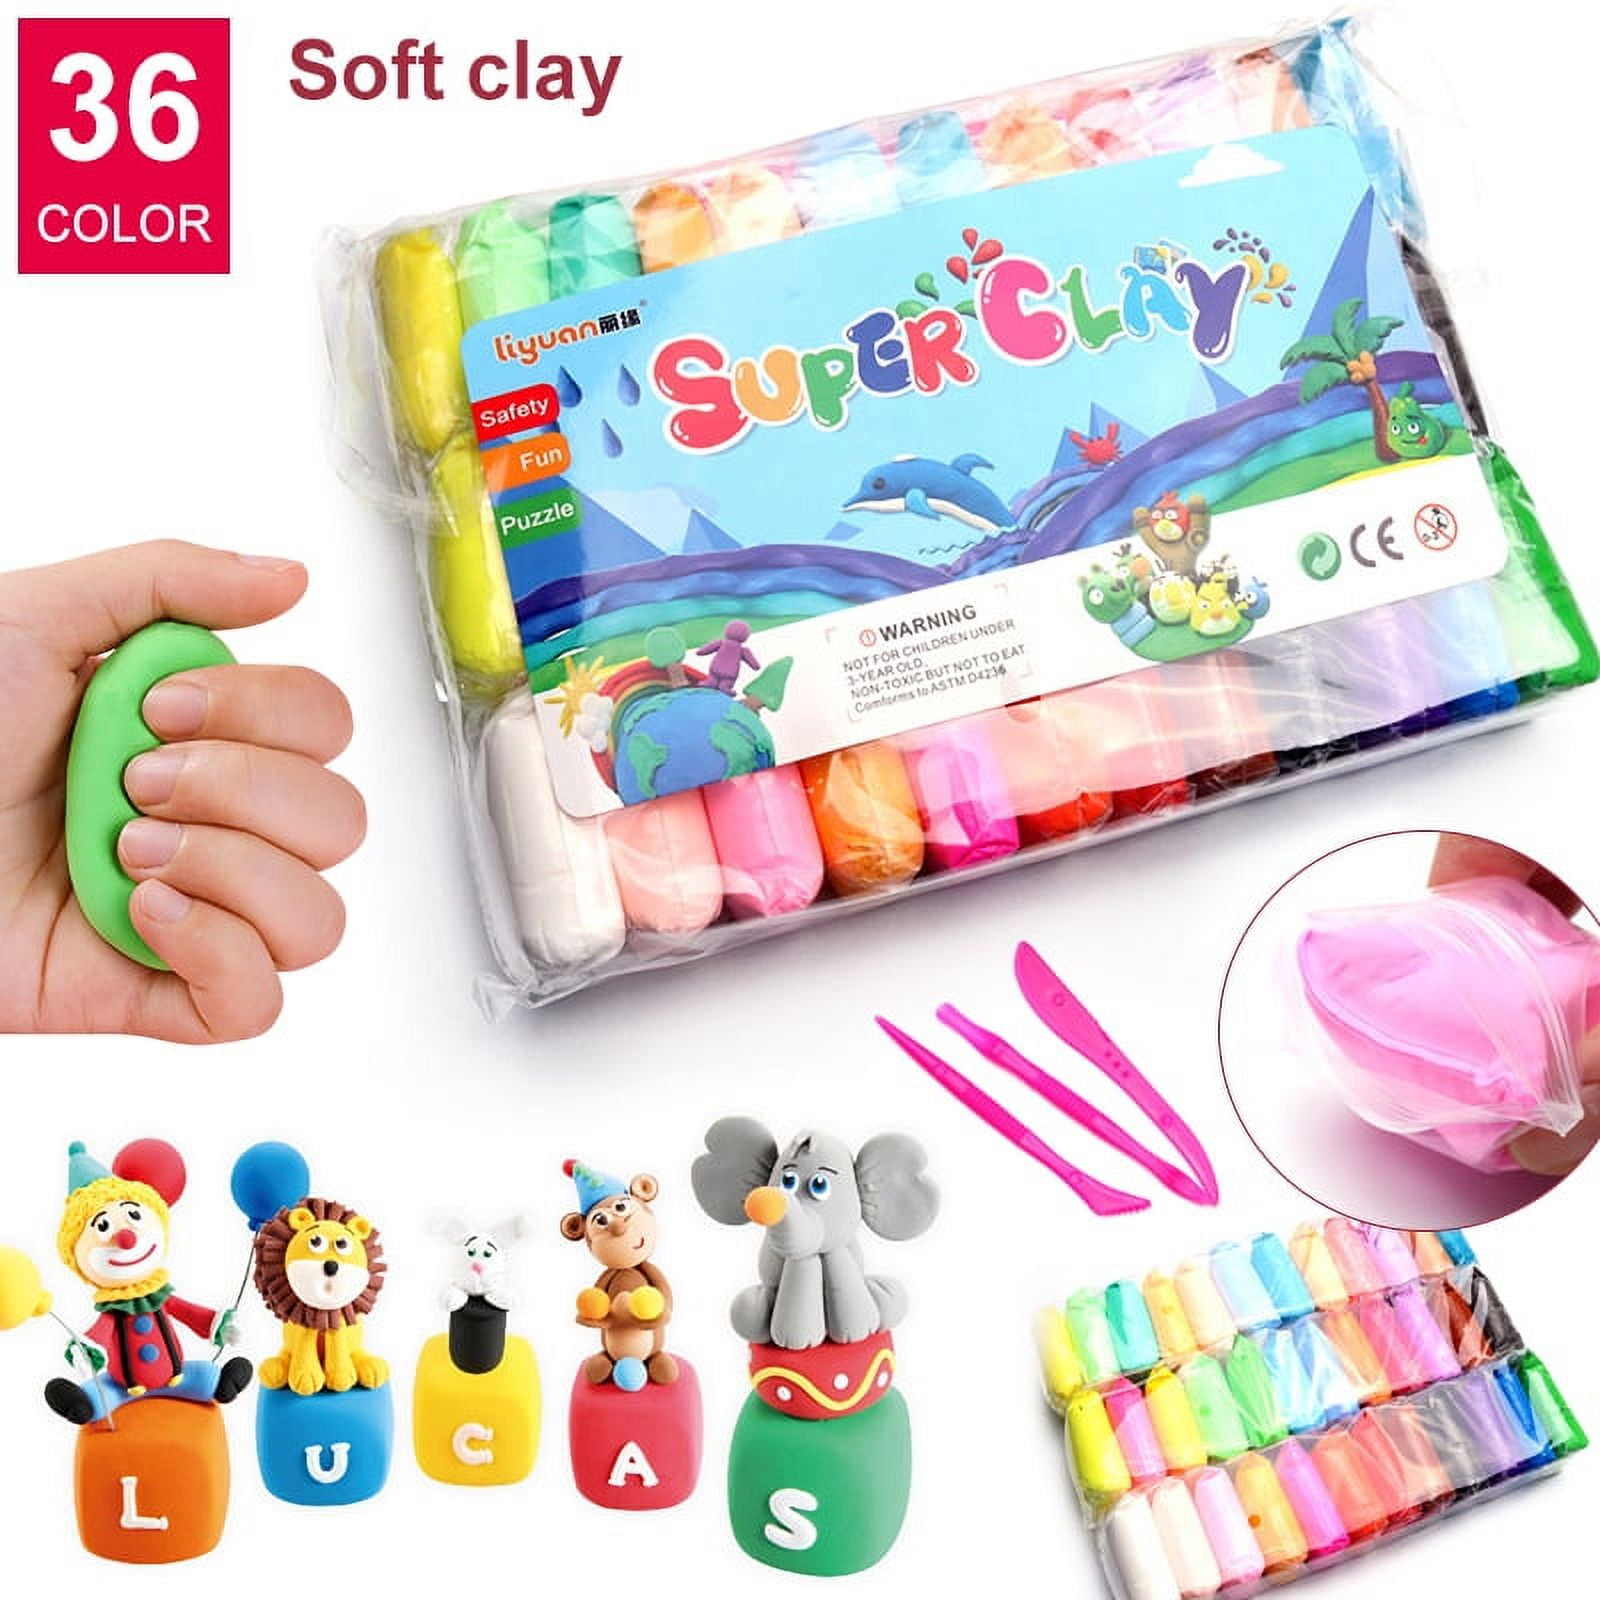 holicolor HOLICOLOR 36 Colors Air Dry Clay Kit Magic Modeling Clay Ultra  Light Clay with Accessories, Tools and Tutorials for Kids DIY